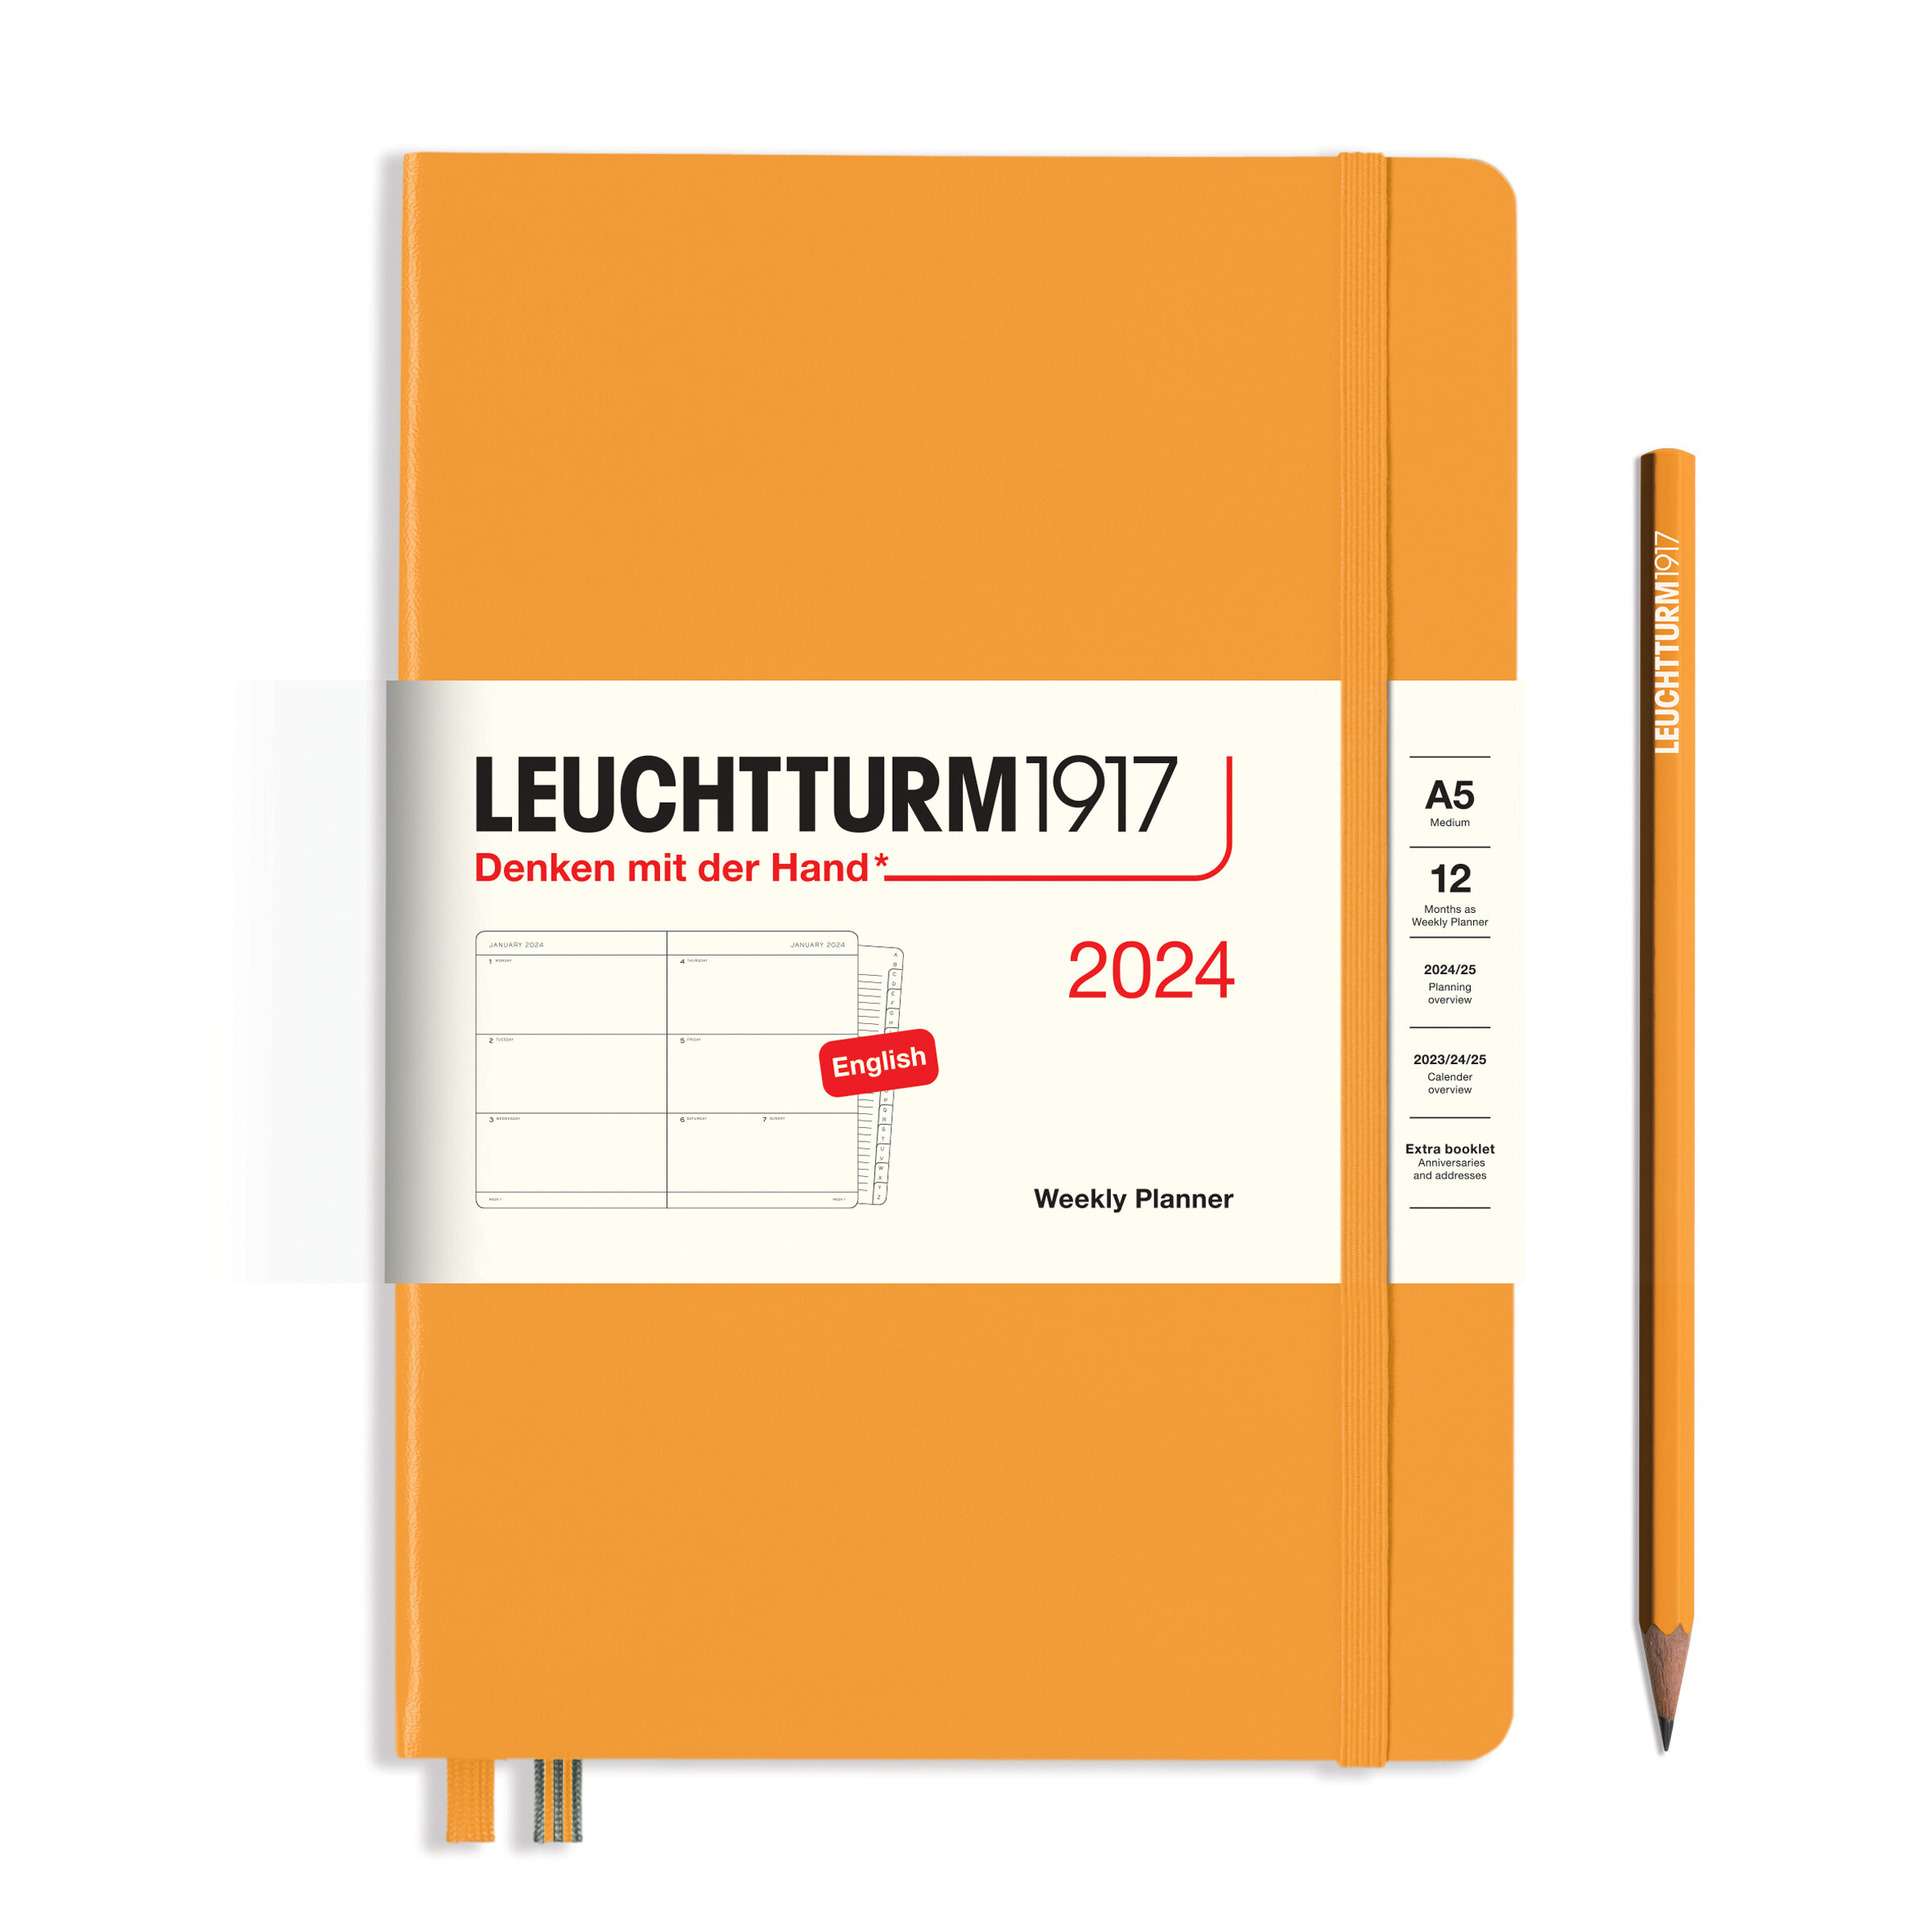 Leuchtturm1917 Weekly Planner Hard Cover Medium A5 2024 - Pencraft the boutique